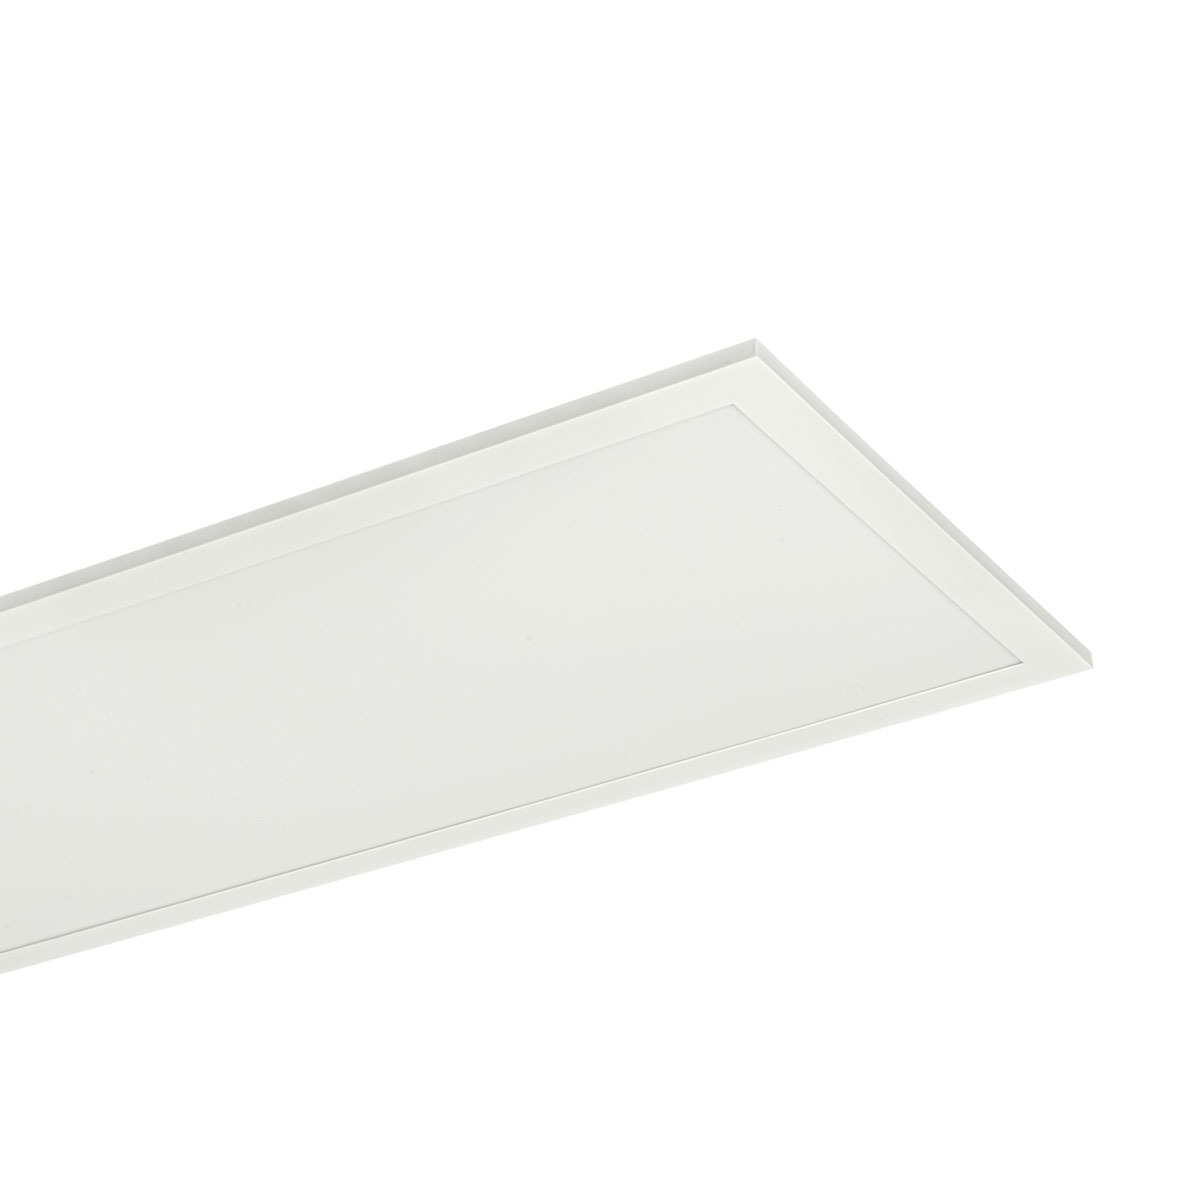 ECO PANEL G2 RECESSED MODULE 1200X600 50W COLOUR SELECT 1-10V